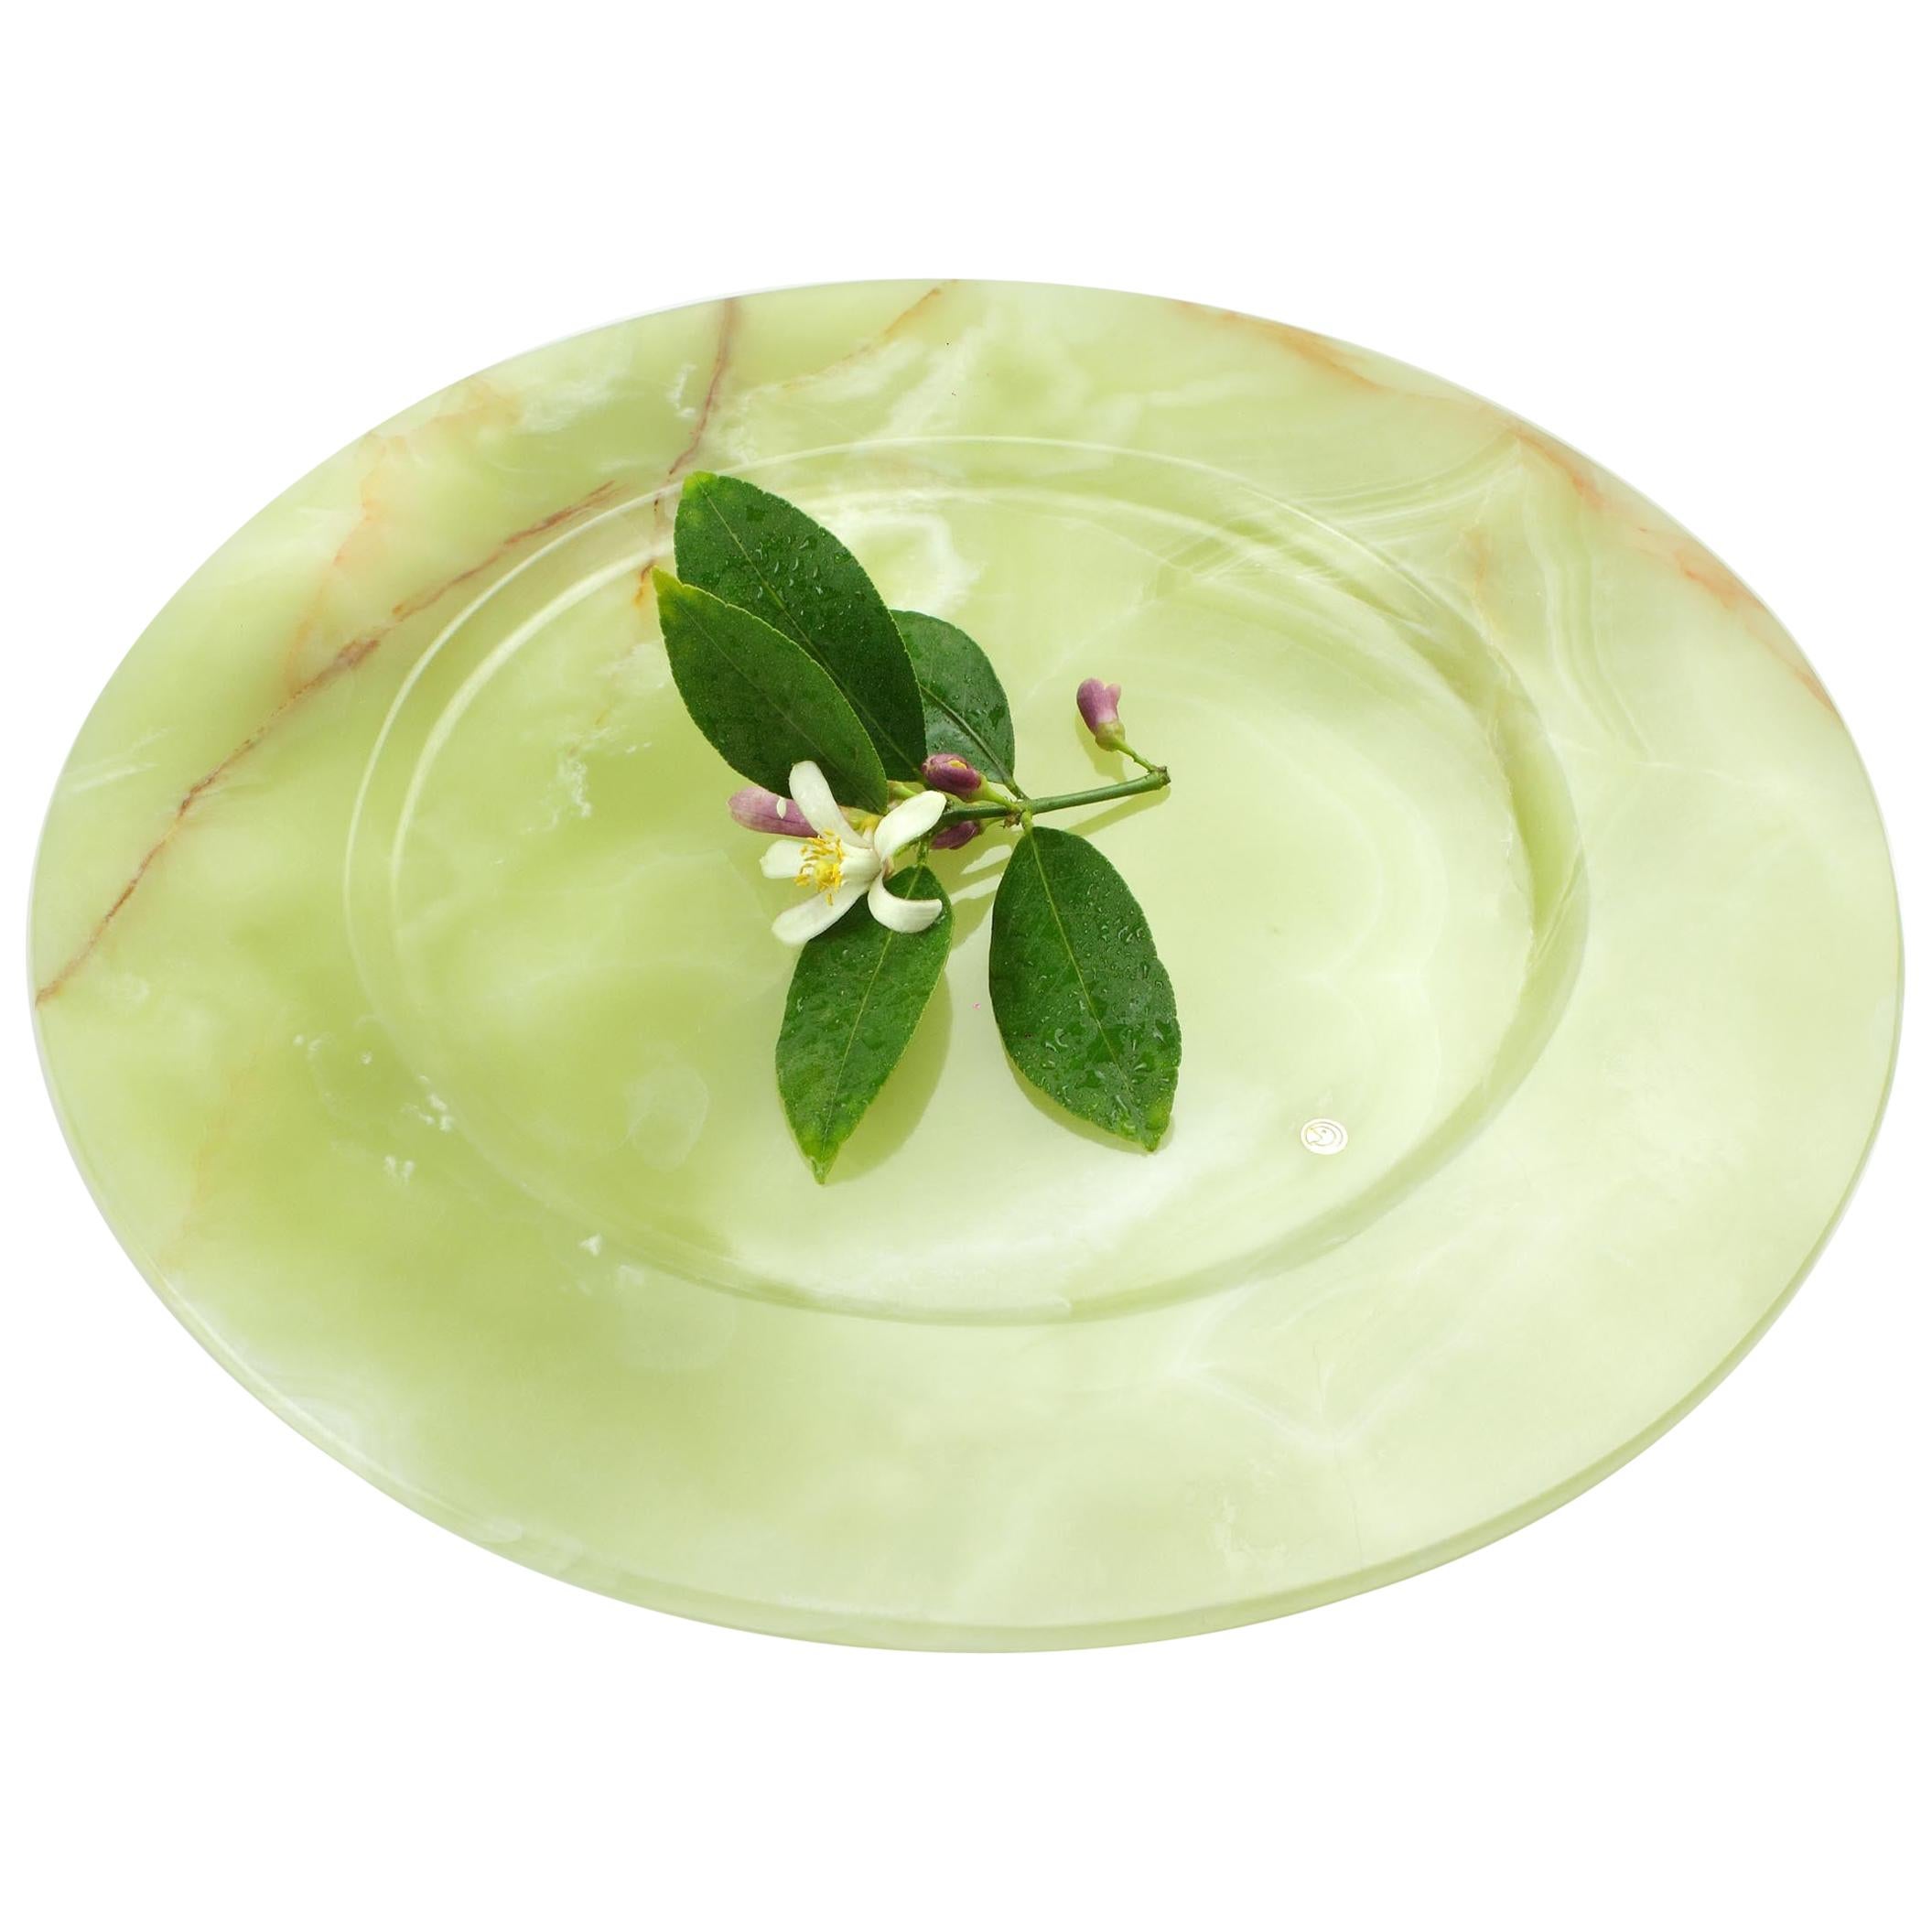  Charger Plate Platters Serveware Green Onyx Marble Handmade Collectible Design For Sale